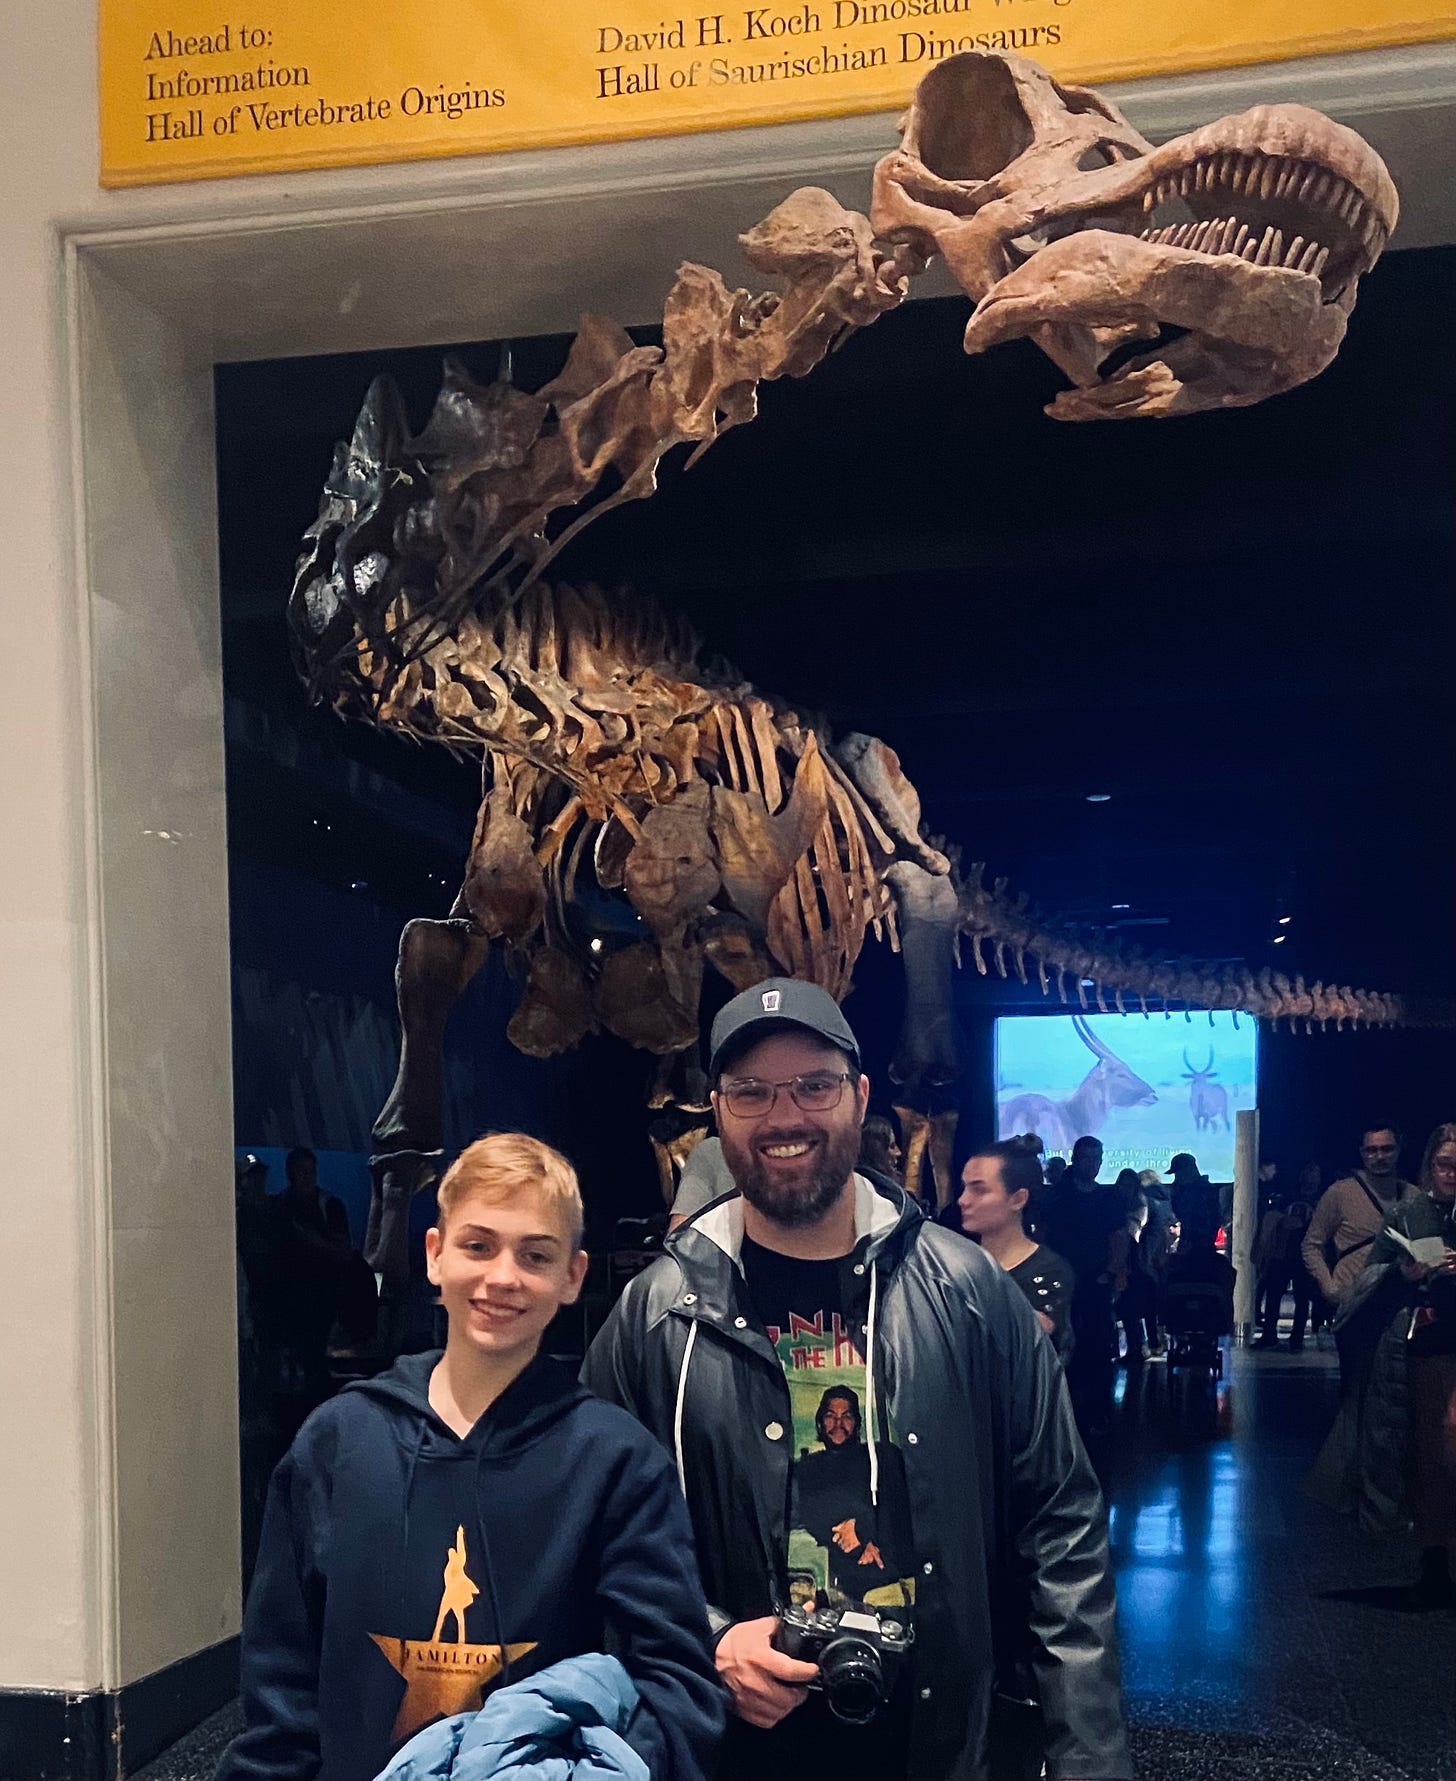 Dustin and the 13-year-old smiling in front of a dinosaur skeleton.